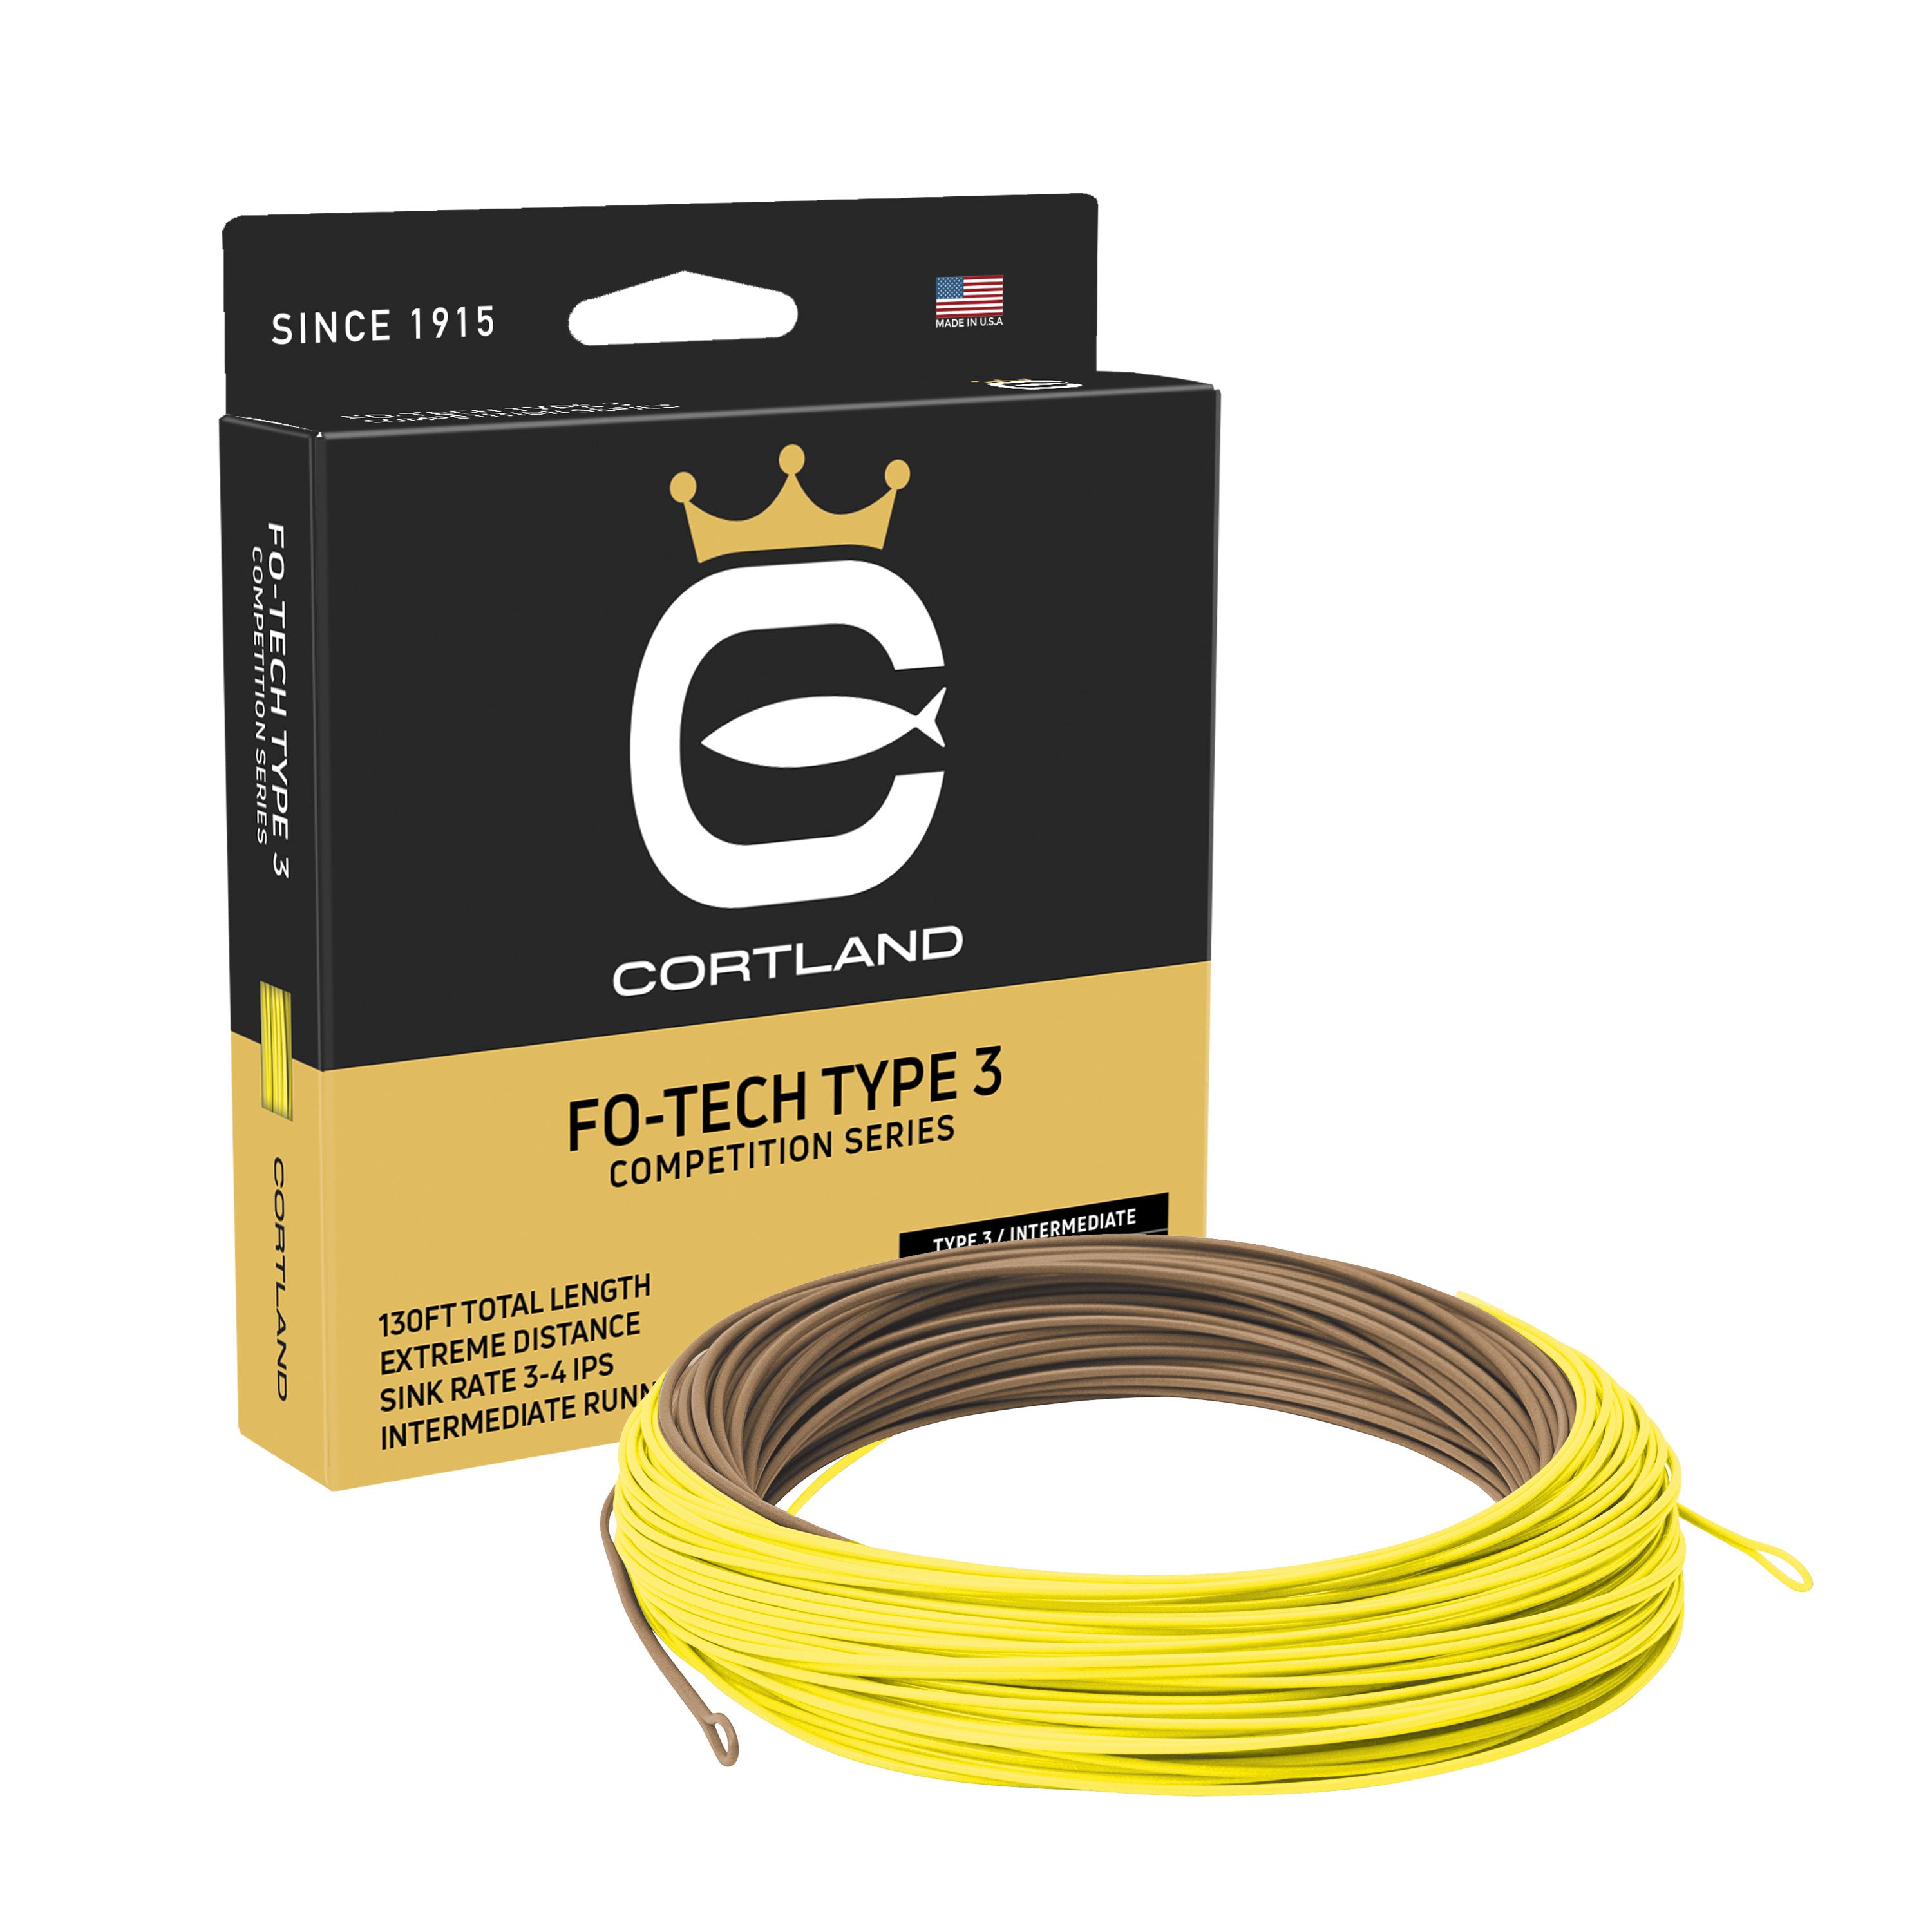 Cortland Competition FO-Tech Type 3 Fly Line - Brown/Yellow - WF6/7S/I